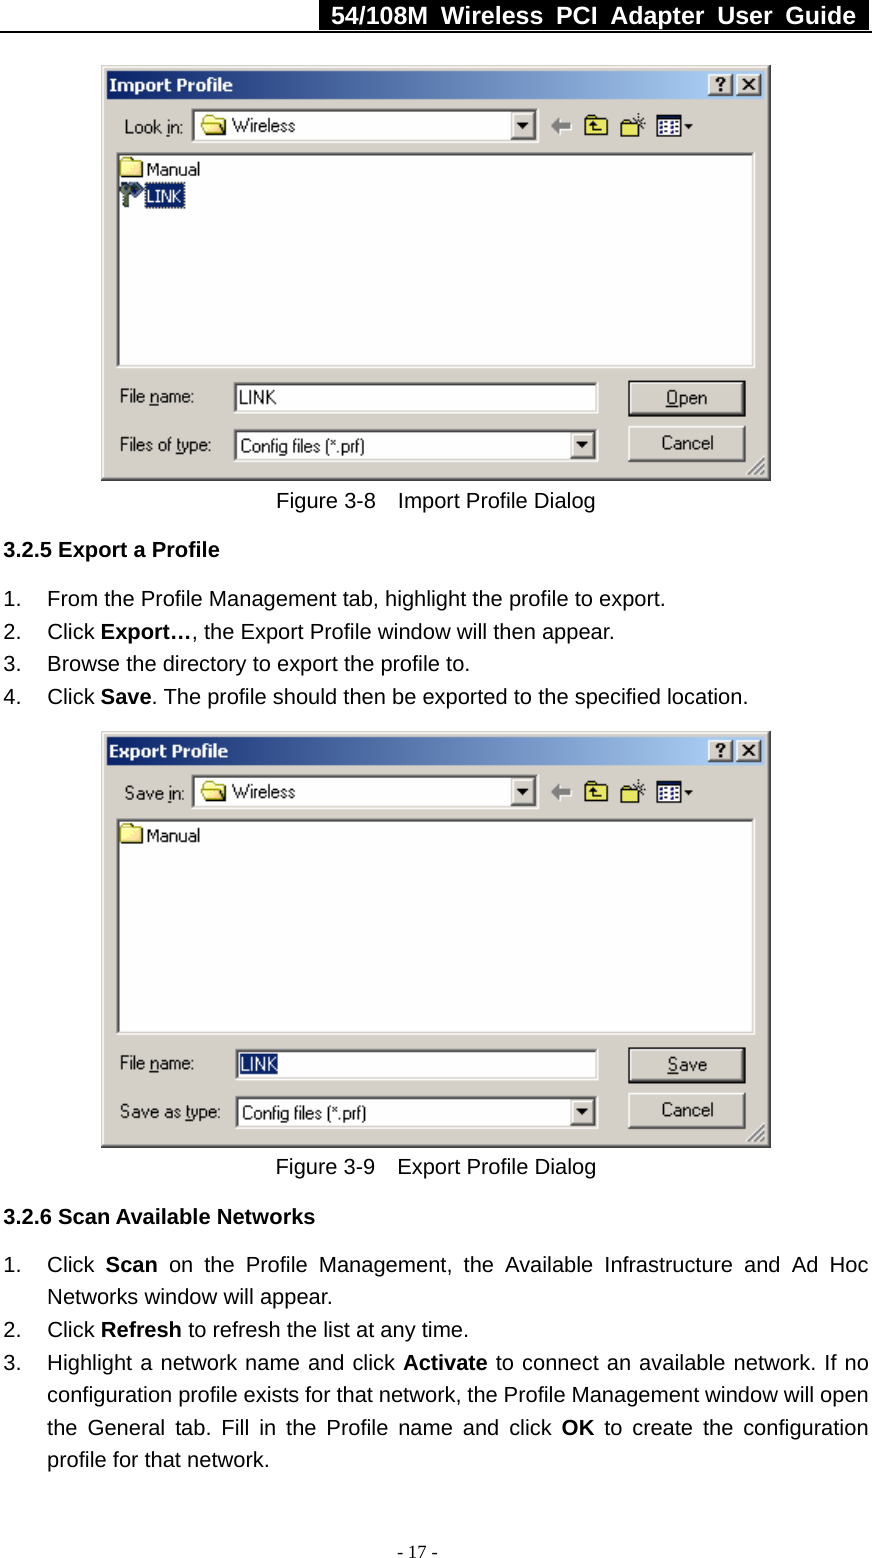   54/108M Wireless PCI Adapter User Guide  - 17 -  Figure 3-8    Import Profile Dialog 3.2.5 Export a Profile 1.  From the Profile Management tab, highlight the profile to export. 2. Click Export…, the Export Profile window will then appear. 3.  Browse the directory to export the profile to. 4. Click Save. The profile should then be exported to the specified location.  Figure 3-9    Export Profile Dialog 3.2.6 Scan Available Networks 1. Click Scan on the Profile Management, the Available Infrastructure and Ad Hoc Networks window will appear. 2. Click Refresh to refresh the list at any time. 3.  Highlight a network name and click Activate to connect an available network. If no configuration profile exists for that network, the Profile Management window will open the General tab. Fill in the Profile name and click OK to create the configuration profile for that network. 